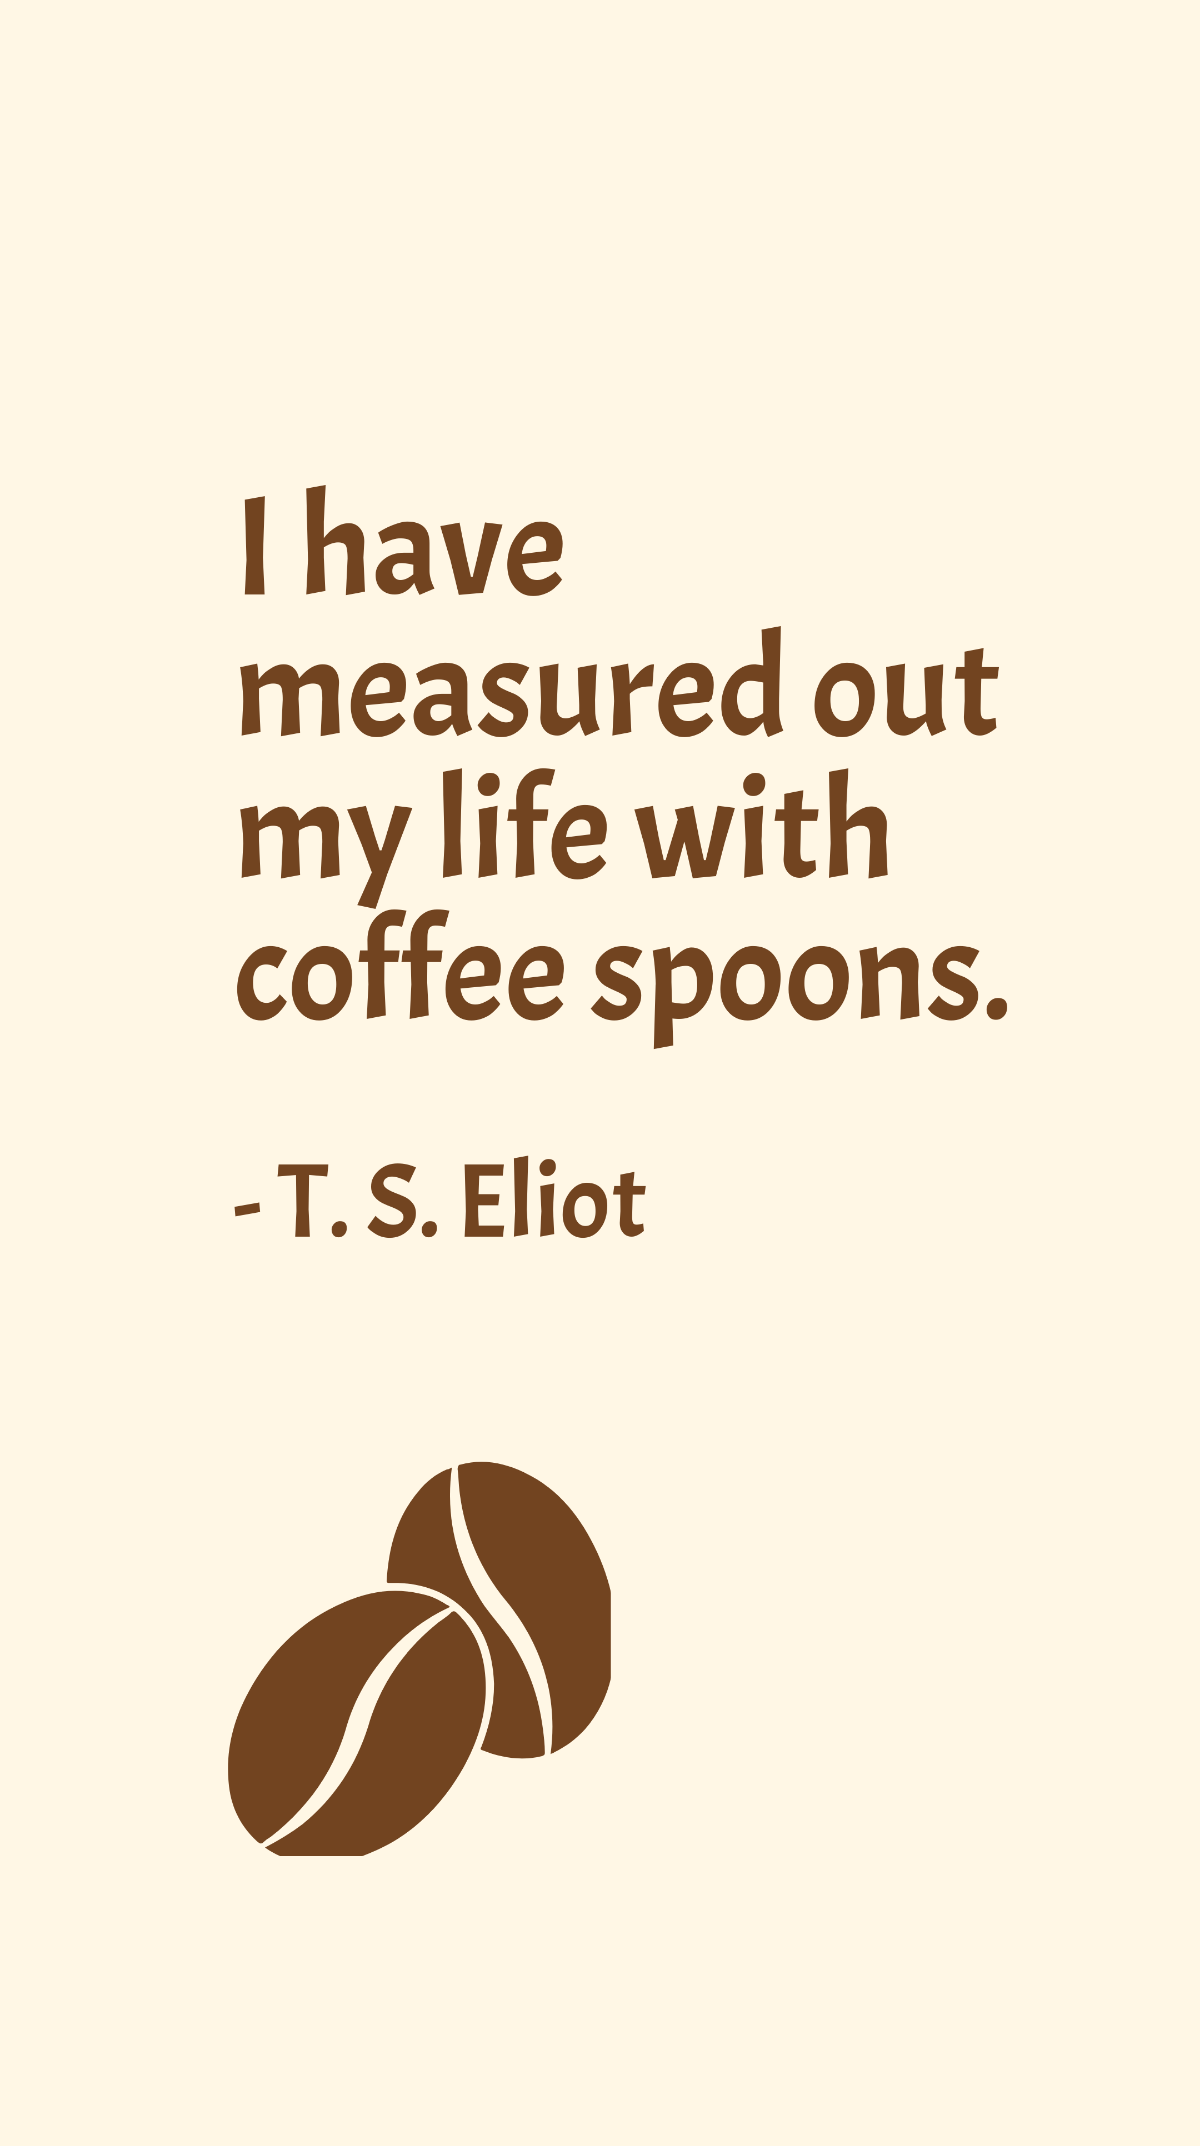 T. S. Eliot - I have measured out my life with coffee spoons.